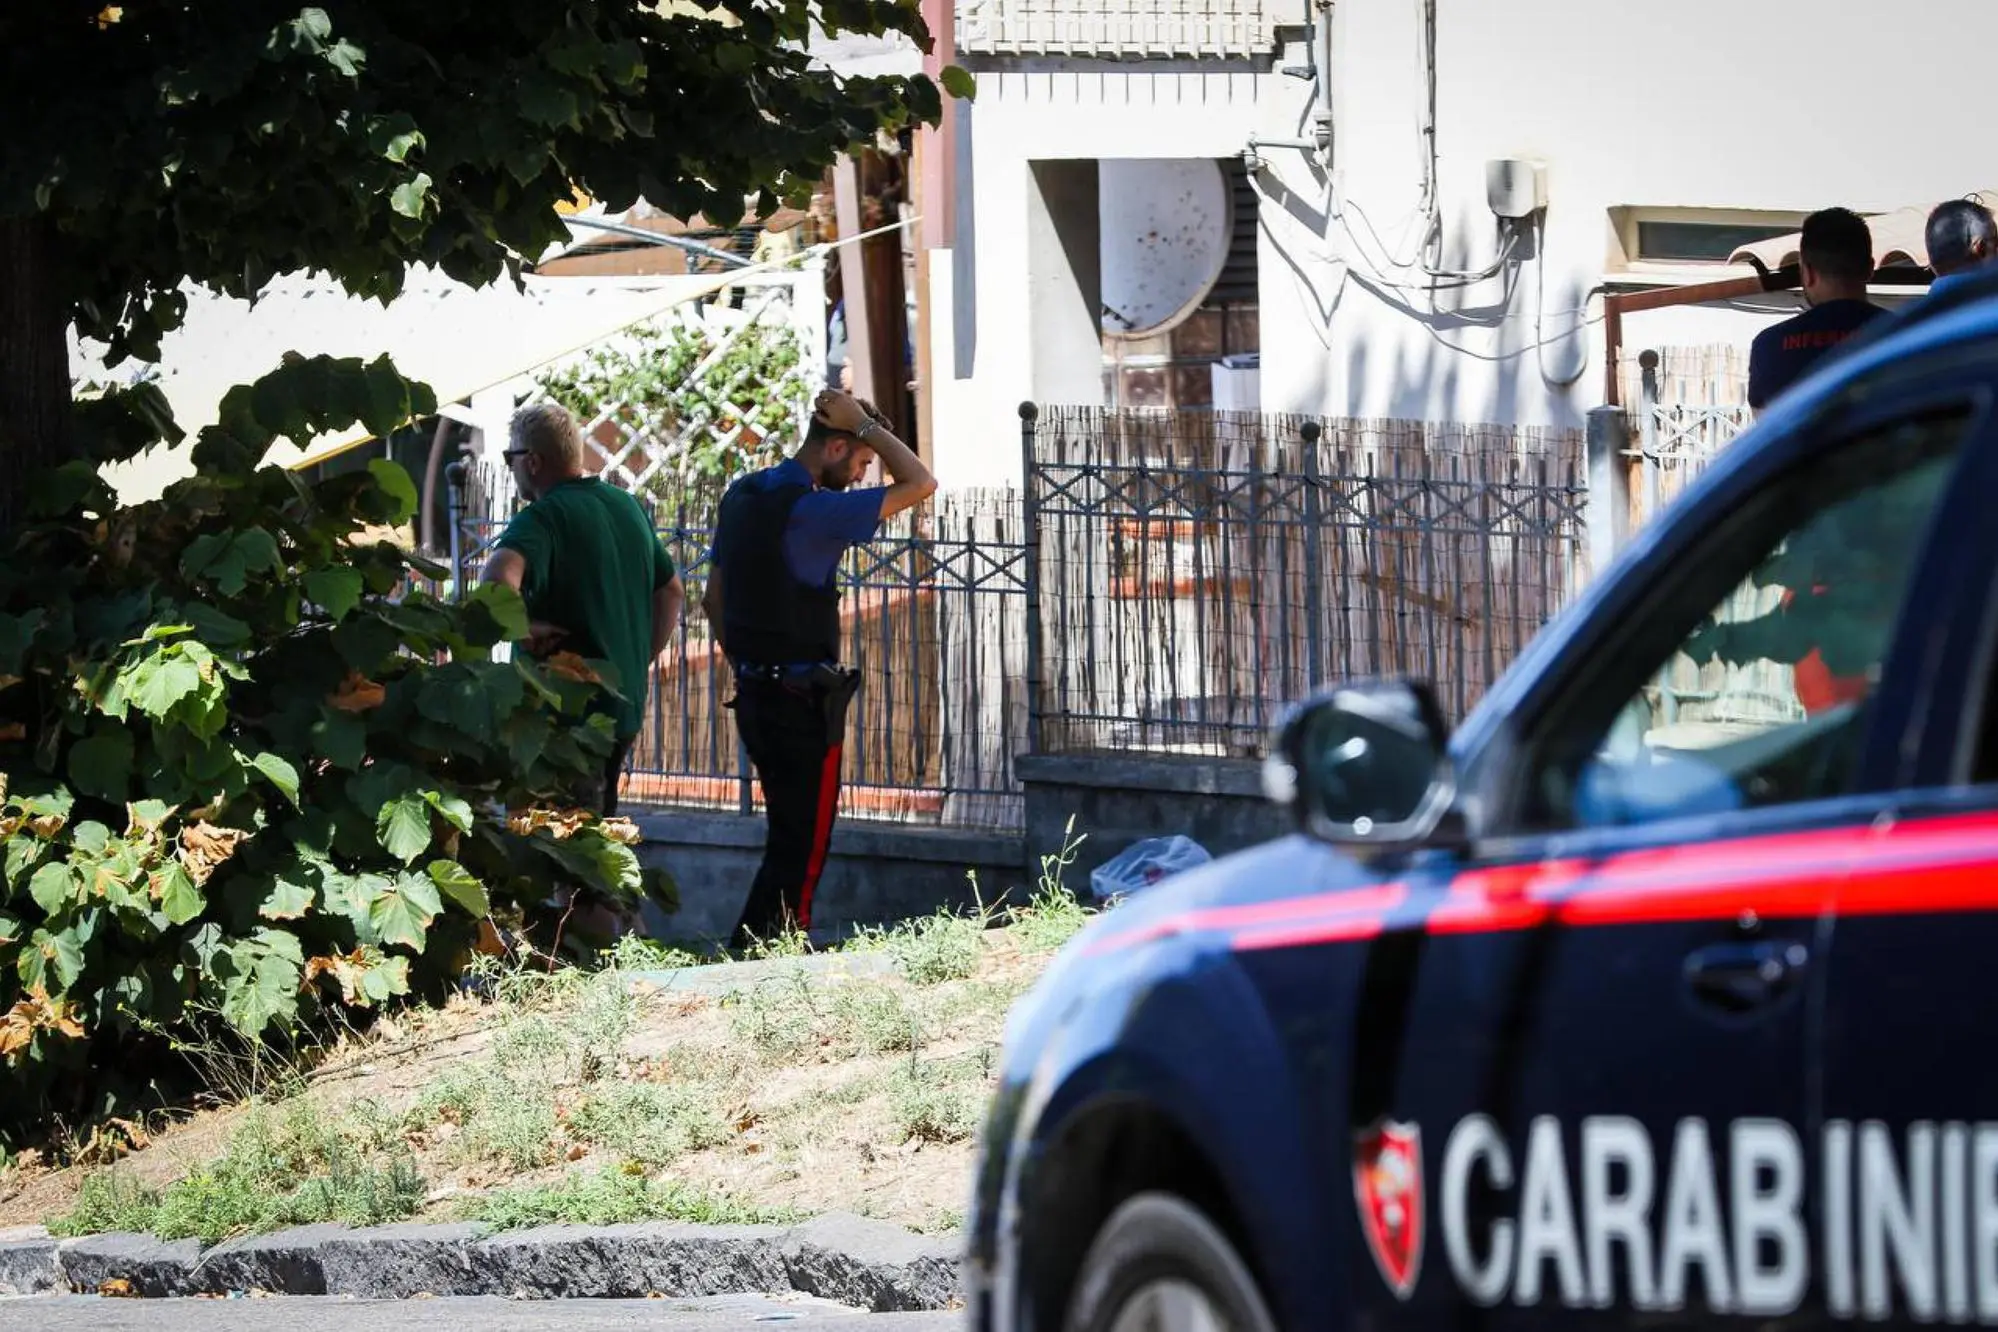 The carabinieri in front of the man's house (Ansa)